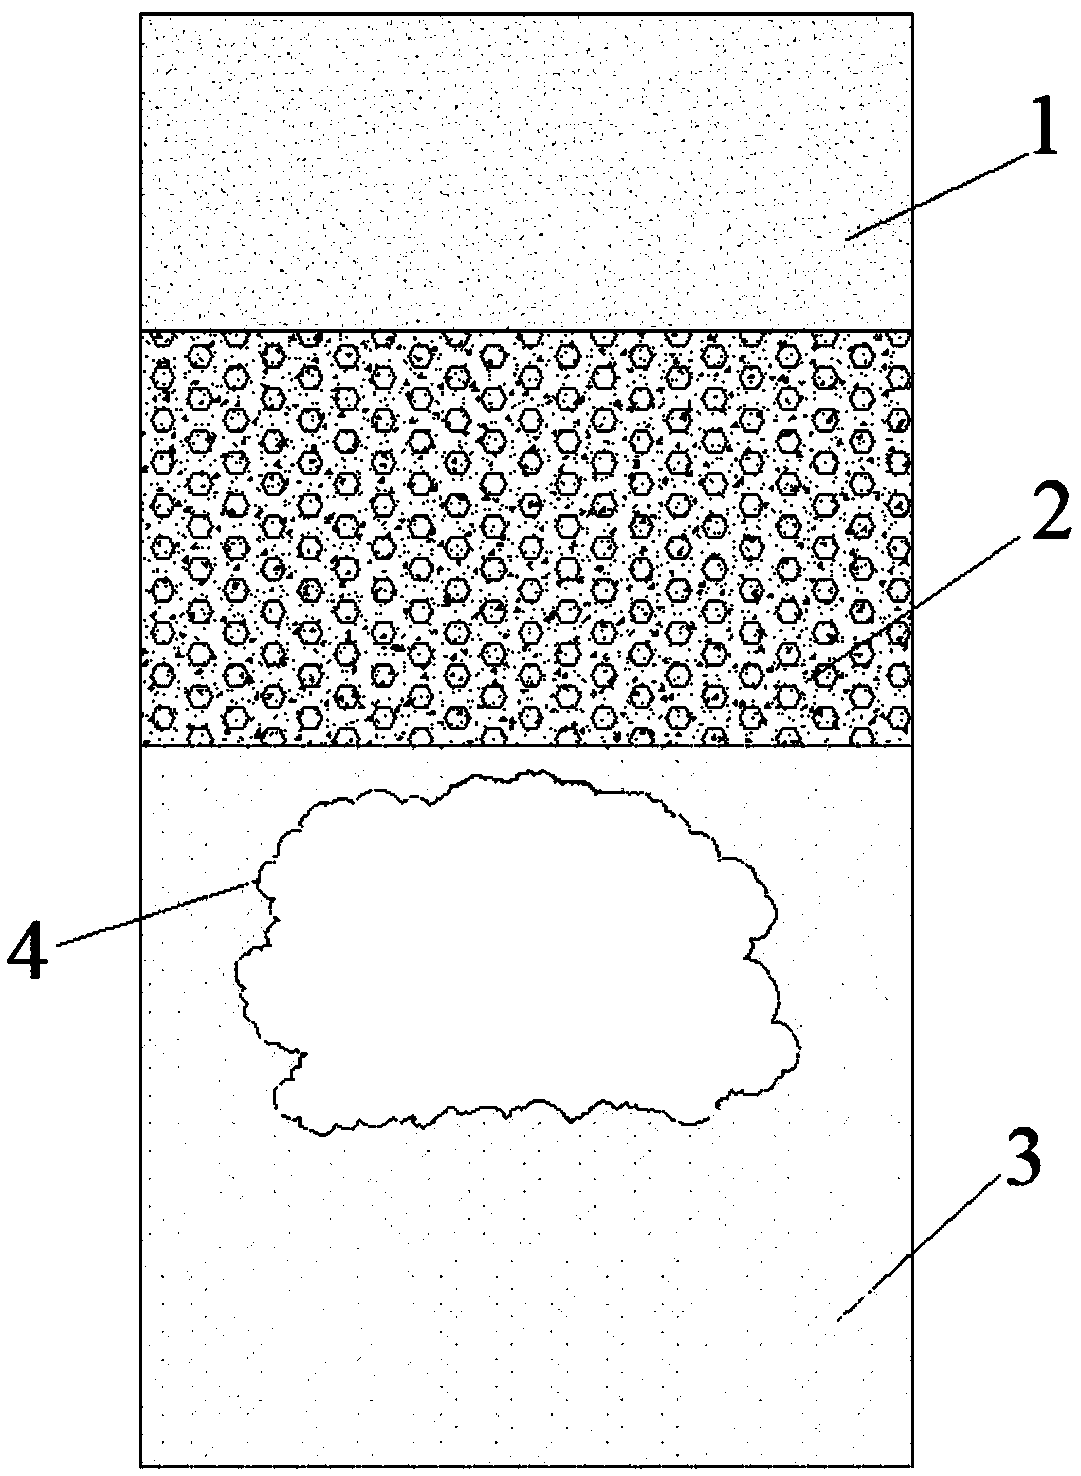 Construction method for increasing one-time qualification rate of pile foundation in karst or broken zone area